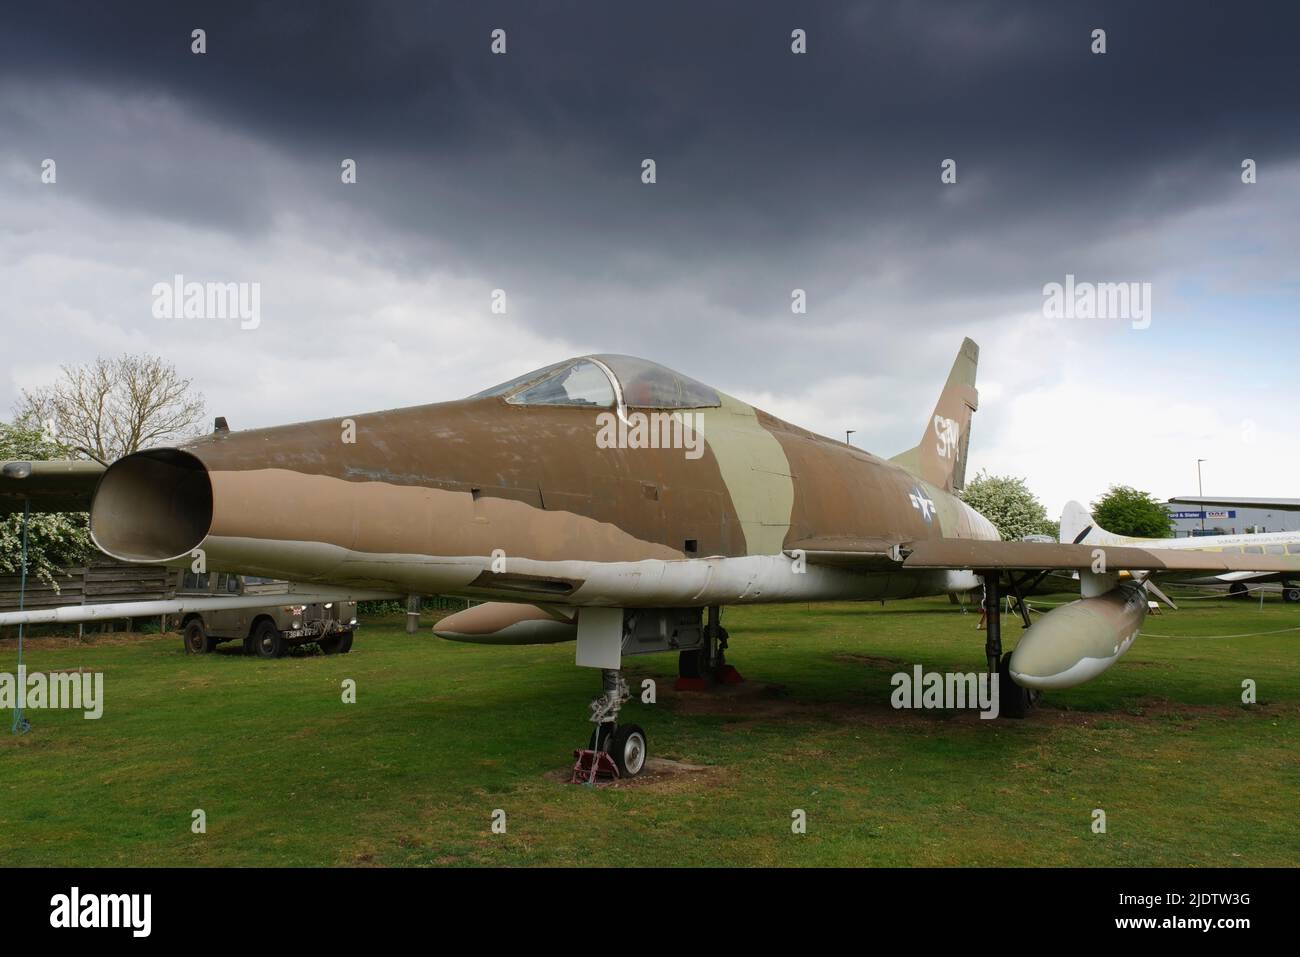 North American F 100D Super Sabre, Painted as 54-0242, Midlands Air Museum, Coventry. Stock Photo